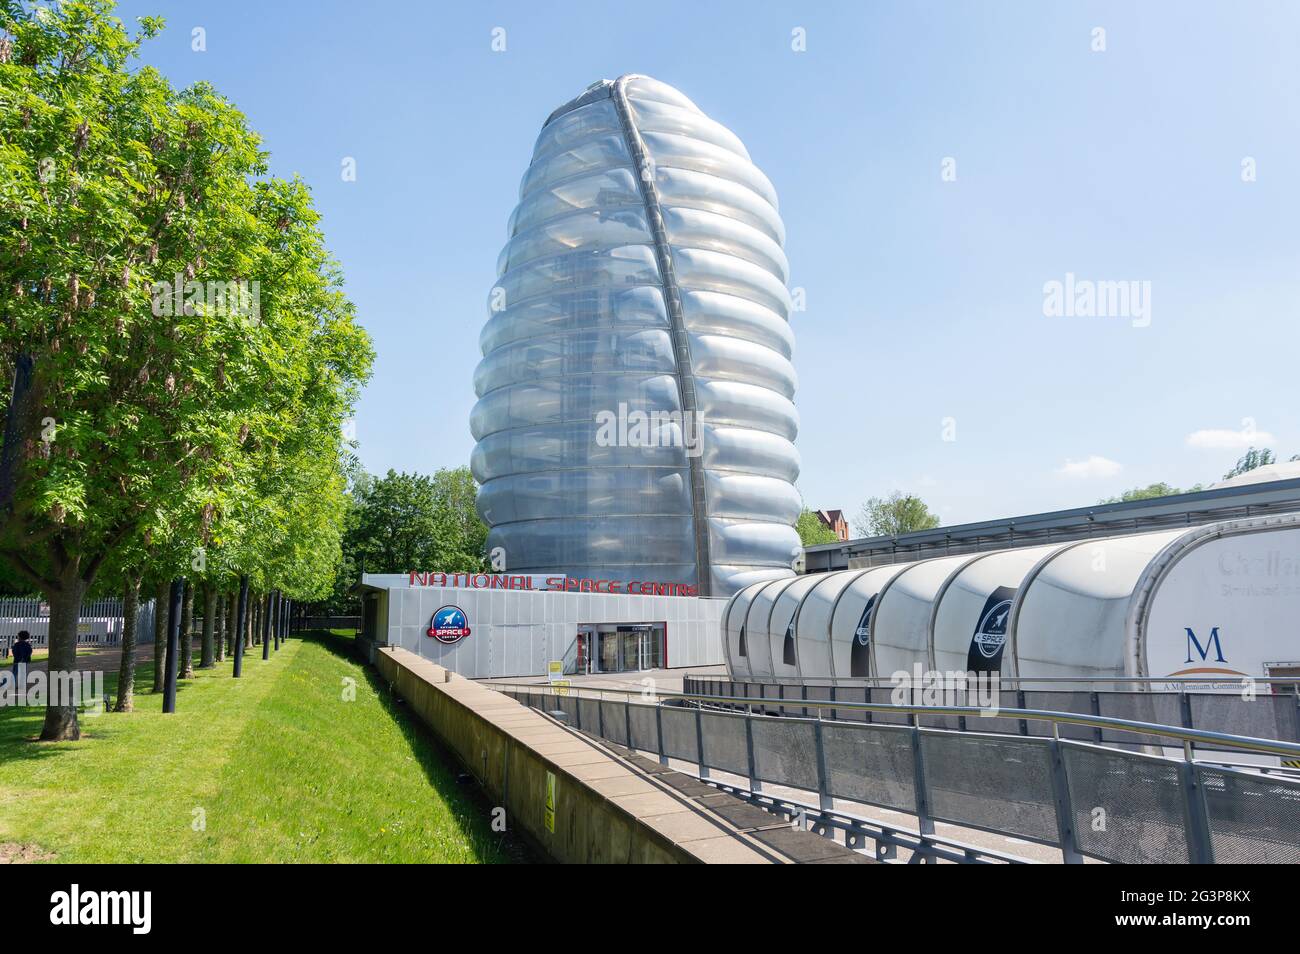 The National Space Centre, Exploration Drive, Belgrave, Leicester, Leicestershire, England, United Kingdom Stock Photo